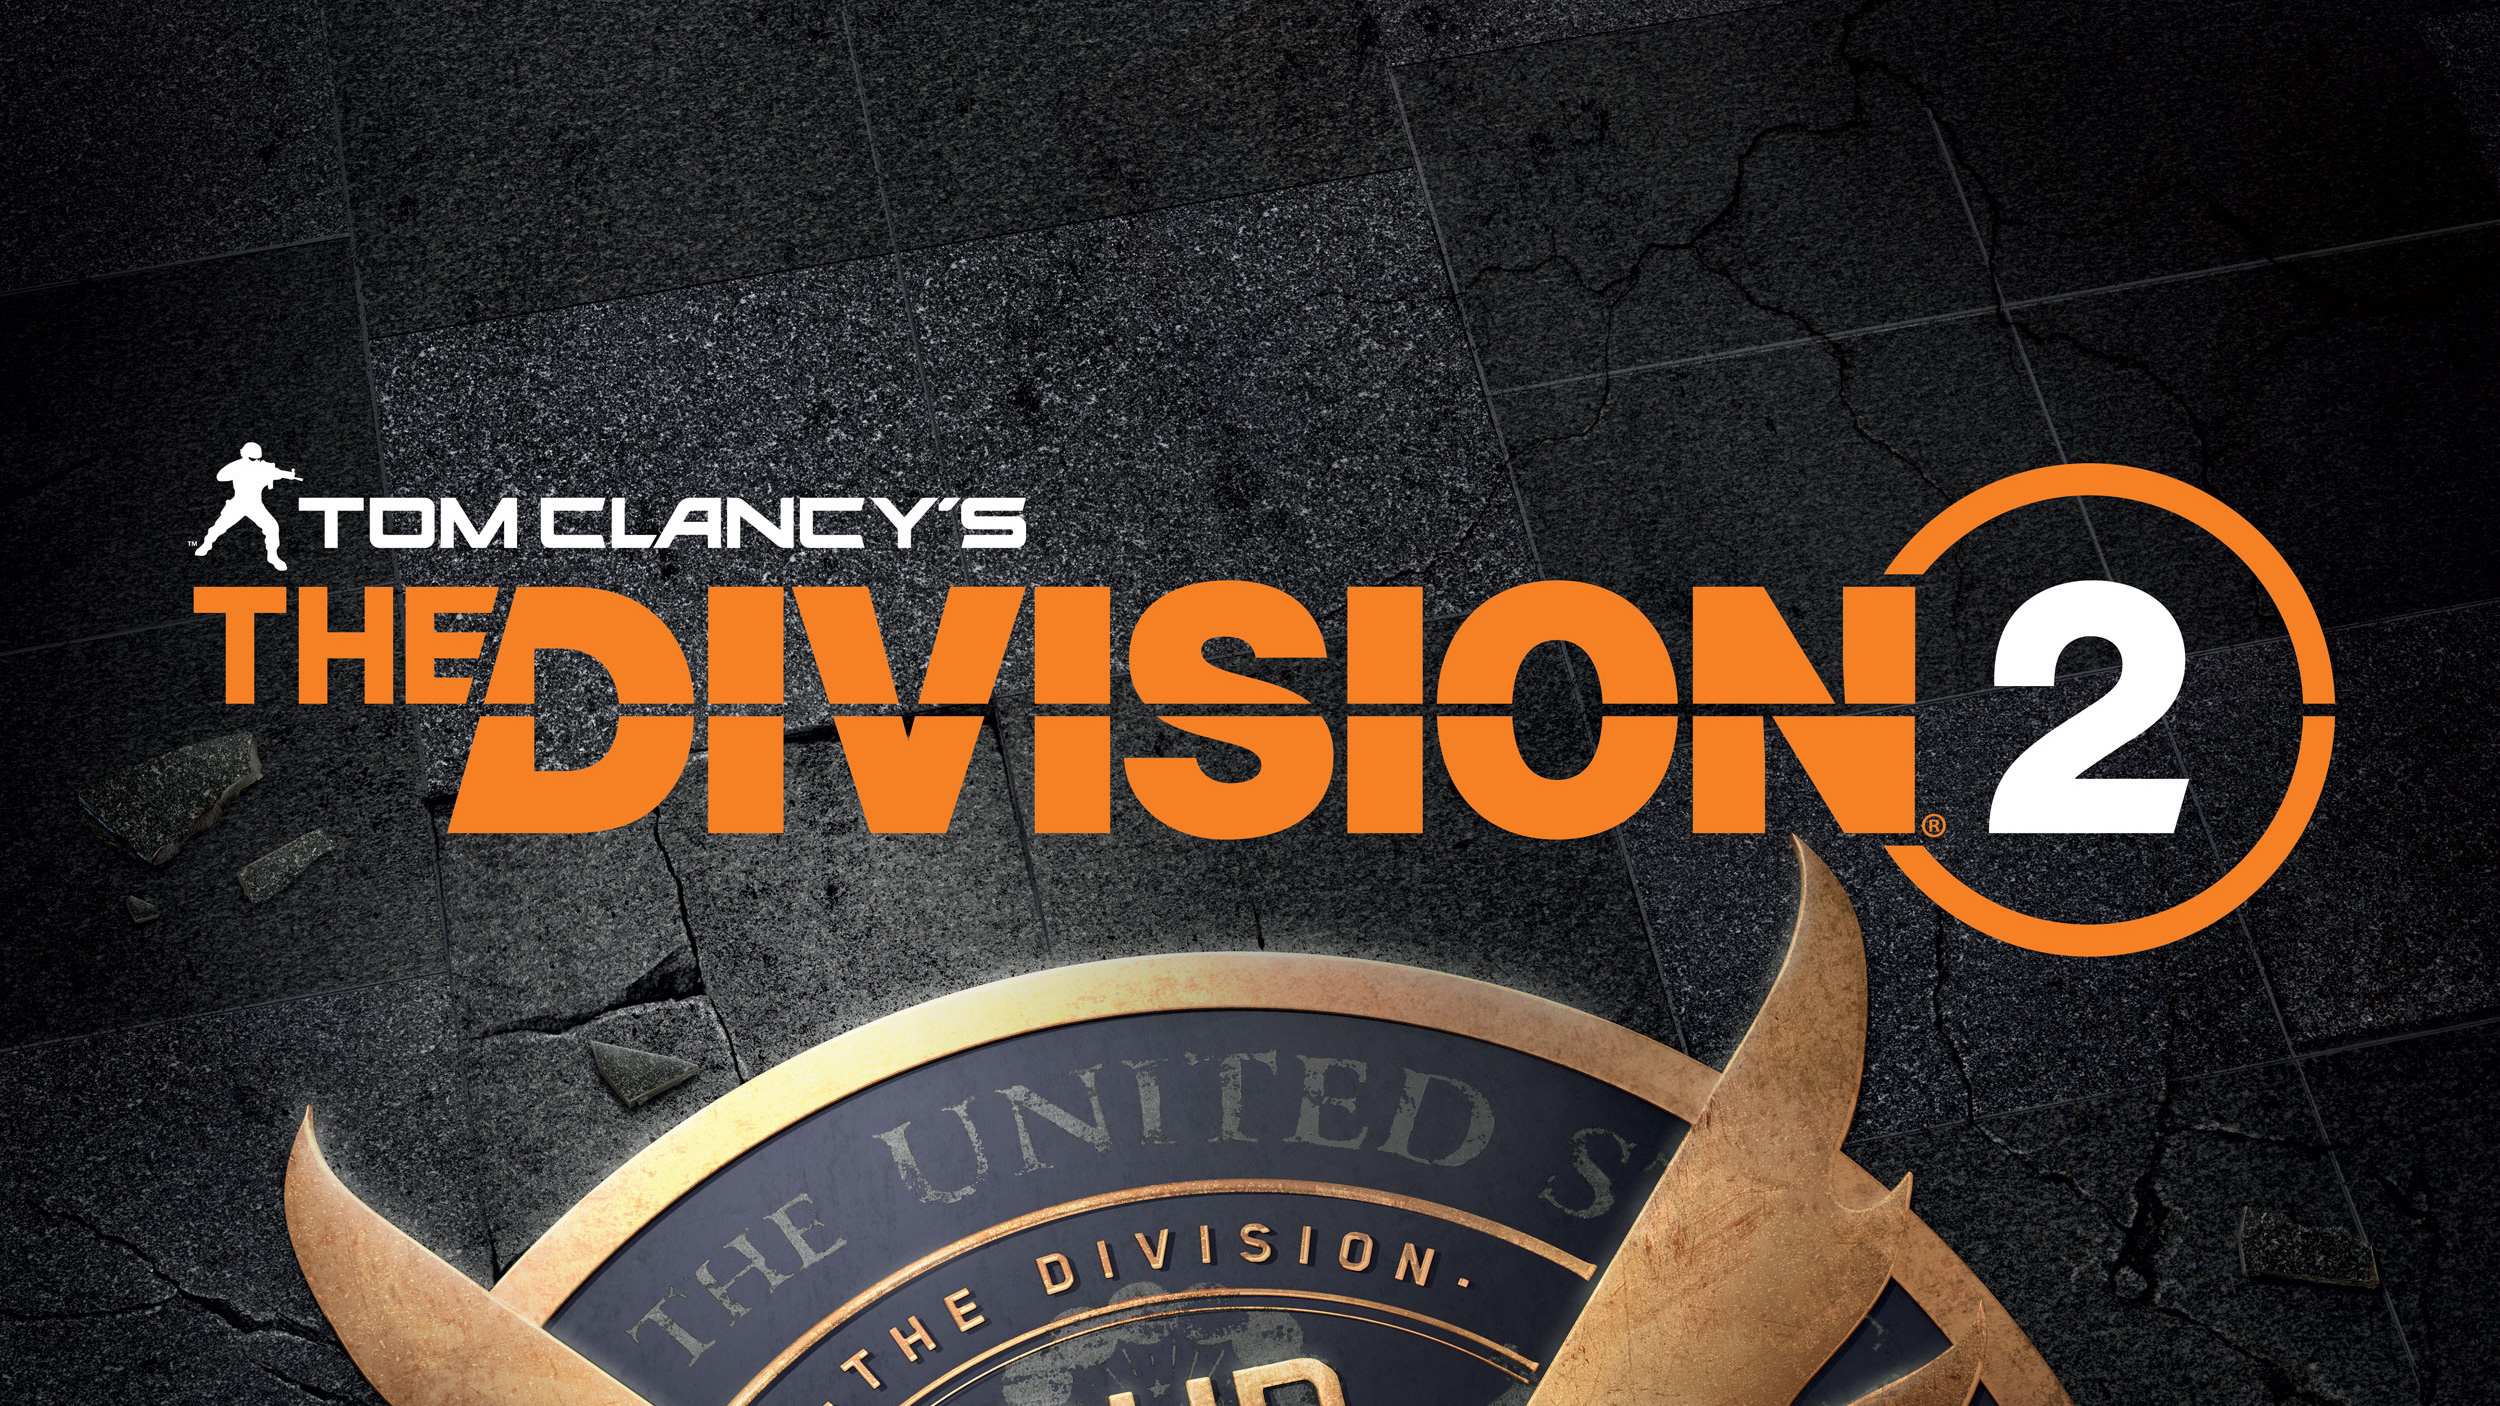 Tom Clancys The Division 2 Logo, HD Games, 4k Wallpaper, Image